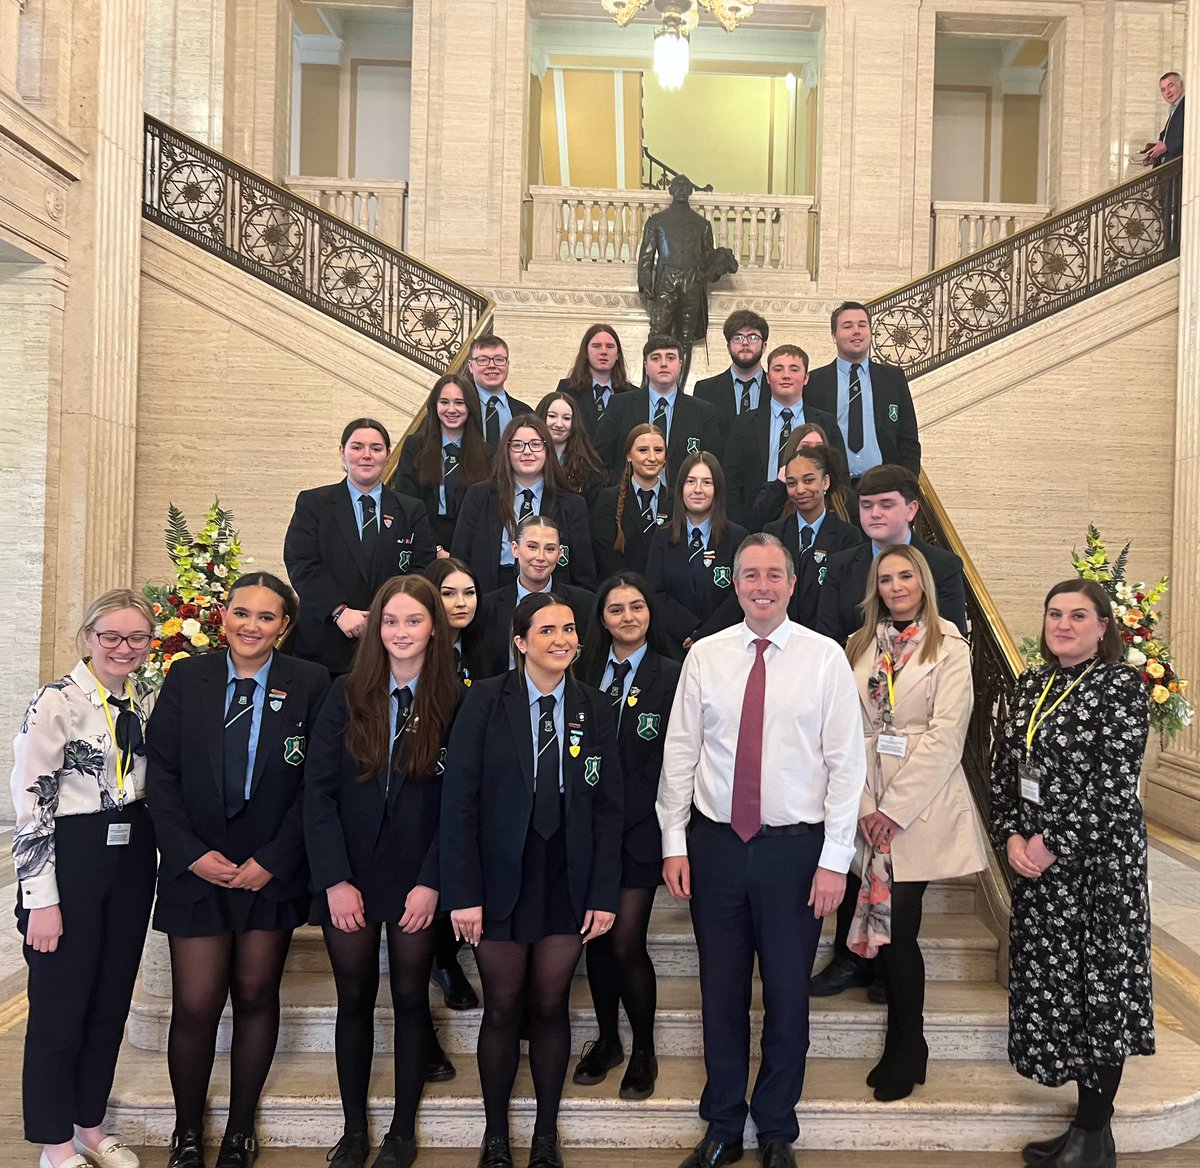 Education Minister @paulgivan met some pupils from Forthill Integrated College, Lisburn, who were visiting Parliament Buildings as part of a @niassembly educational visit today. The Minister discussed a range of education issues with the students.